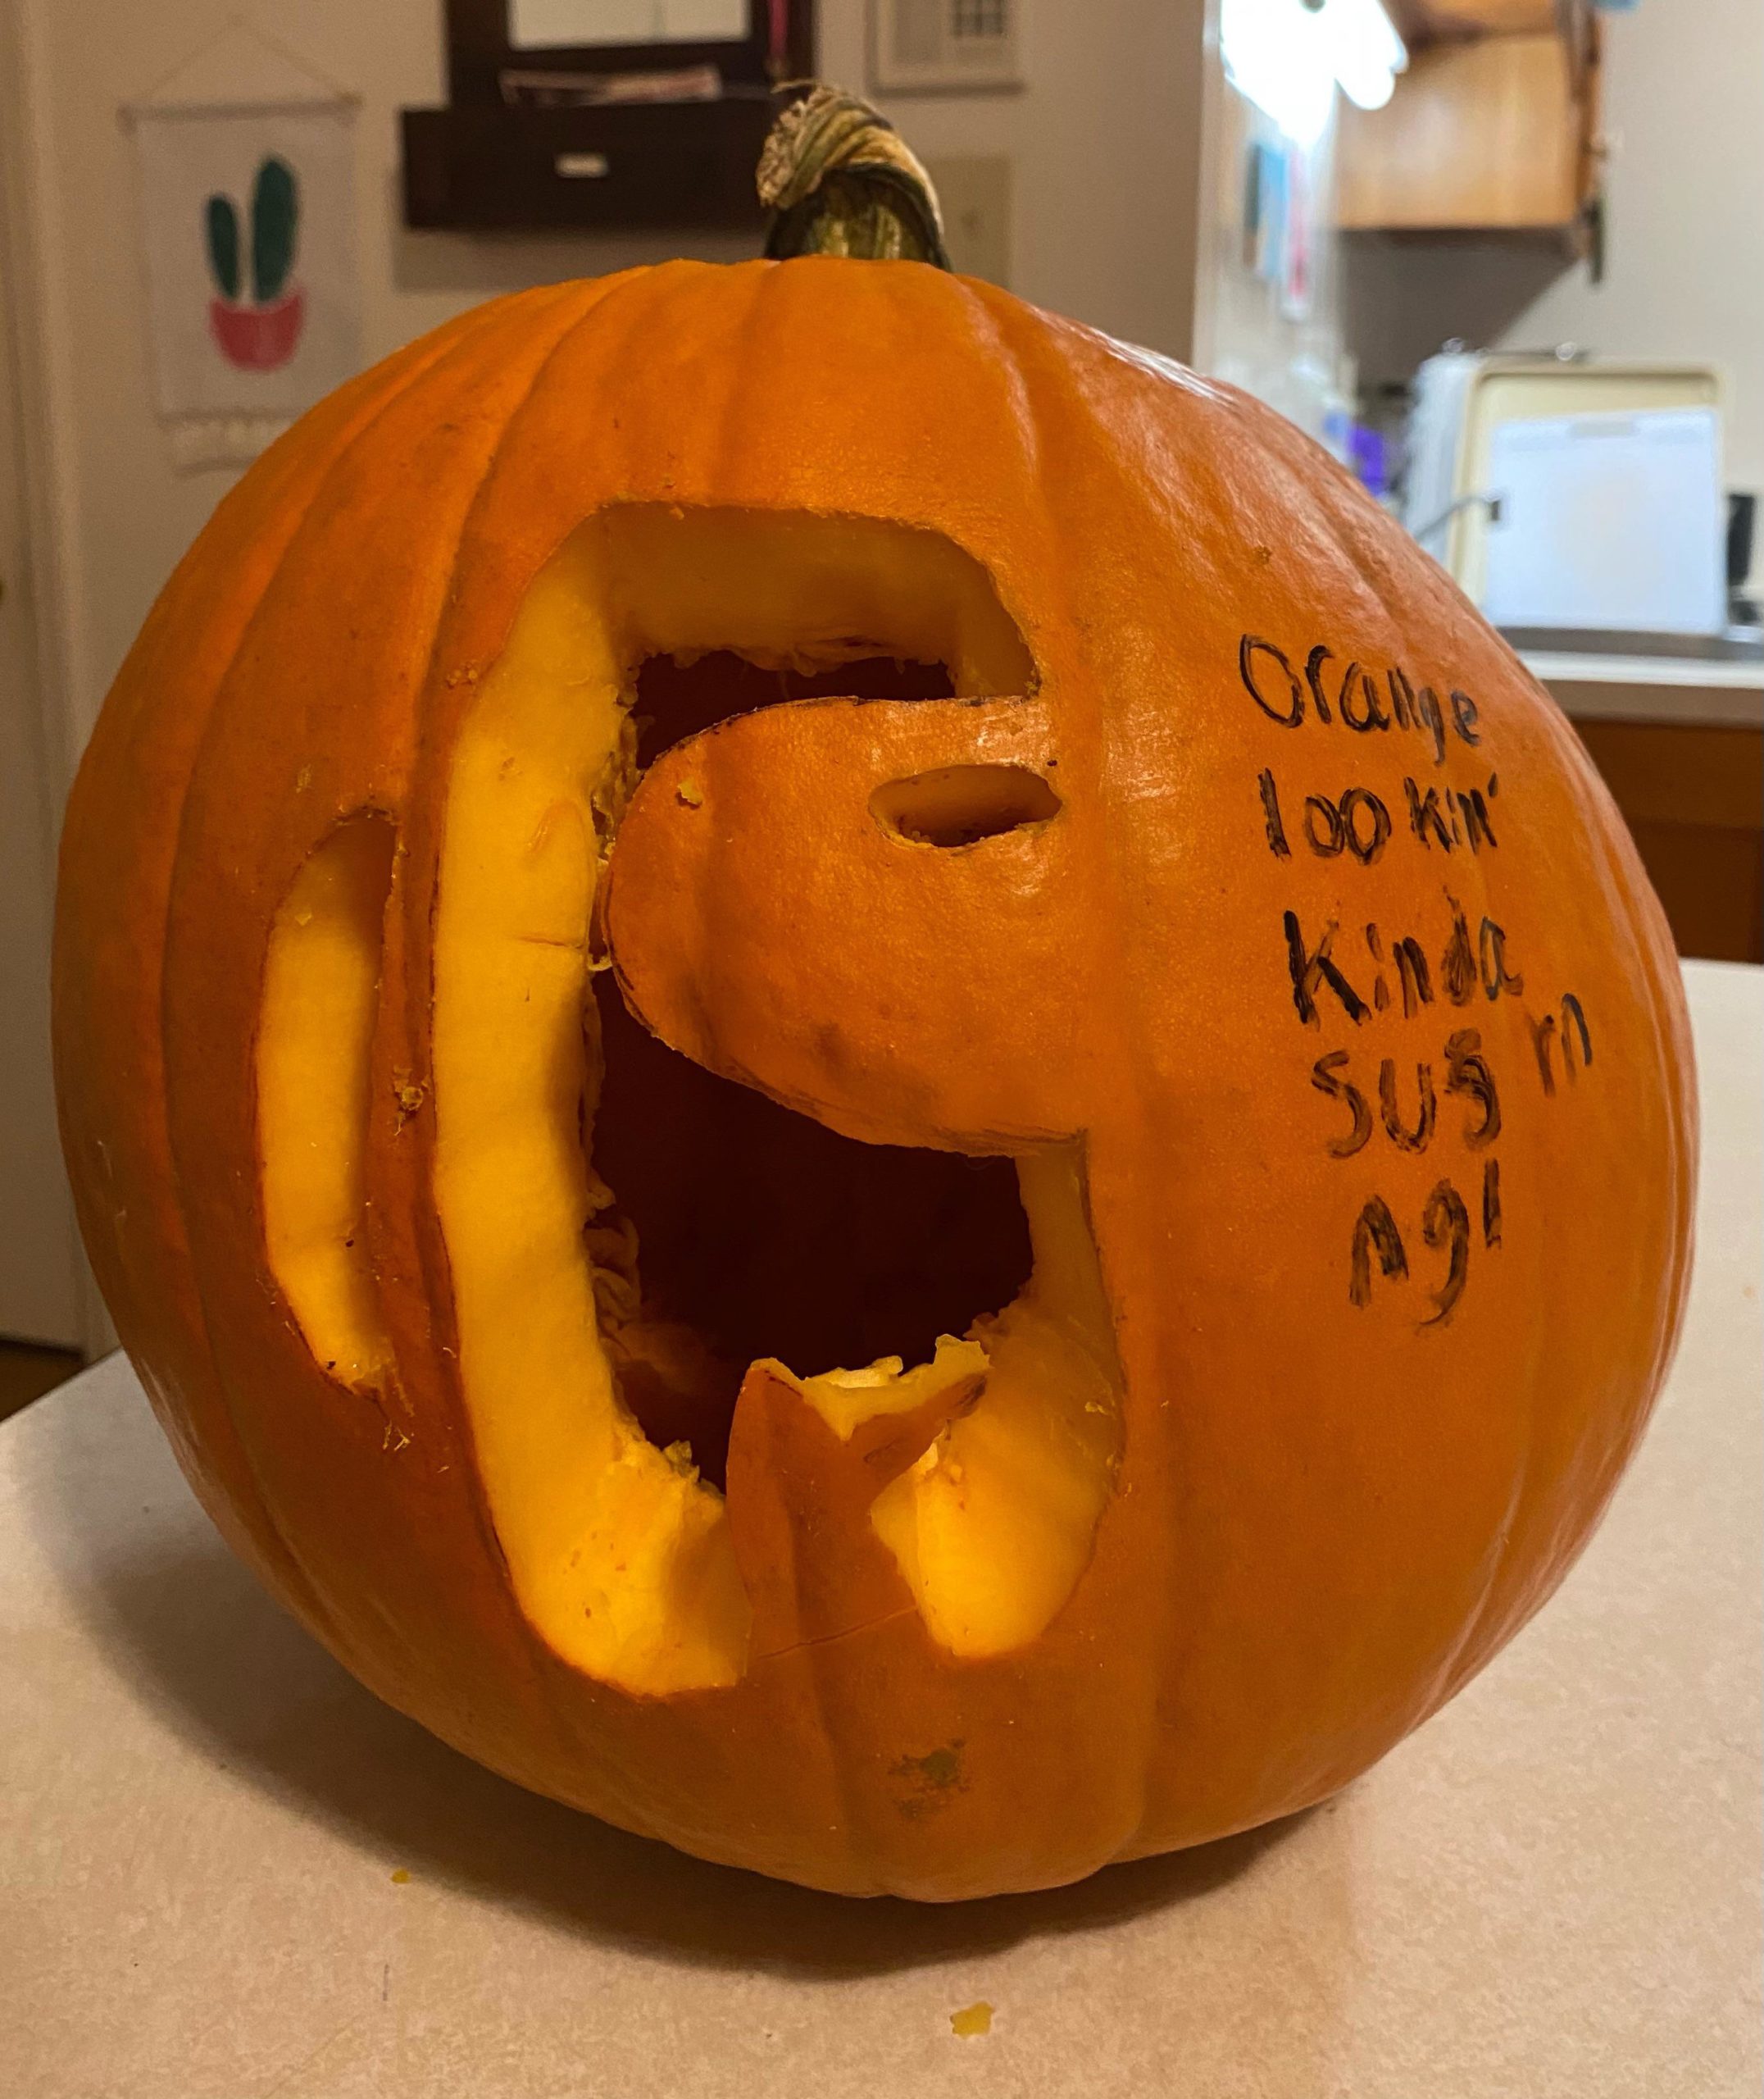 The Coolest Among Us Pumpkin Carving Pics, Check Them Out!